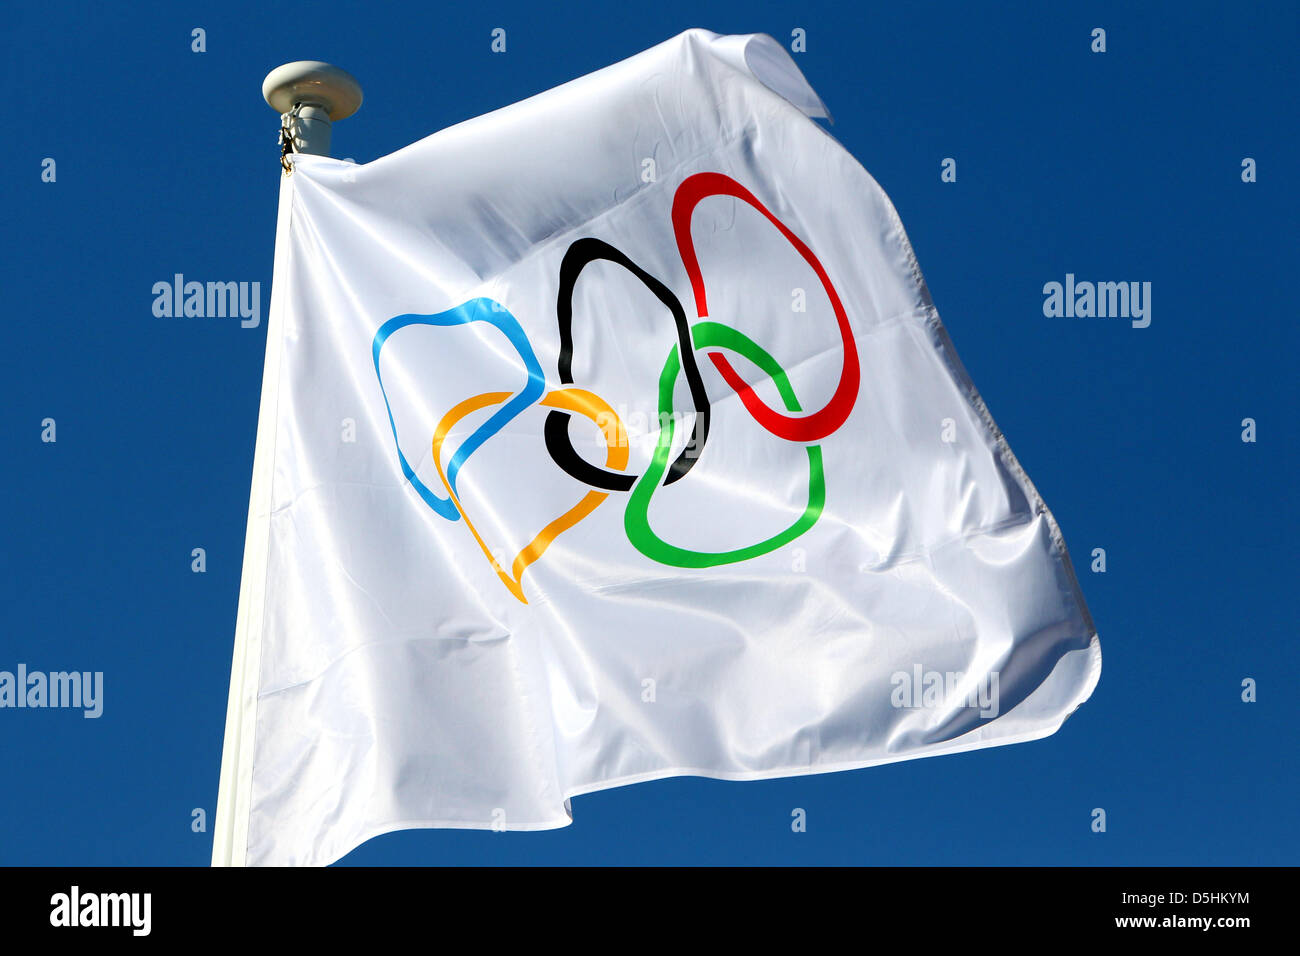 The Olympic flag with the Olympic rings waves at the Olympic Village in Vancouver, BC, Canada, 09 Ferbuary 2010. Photo: Daniel Karmann Stock Photo